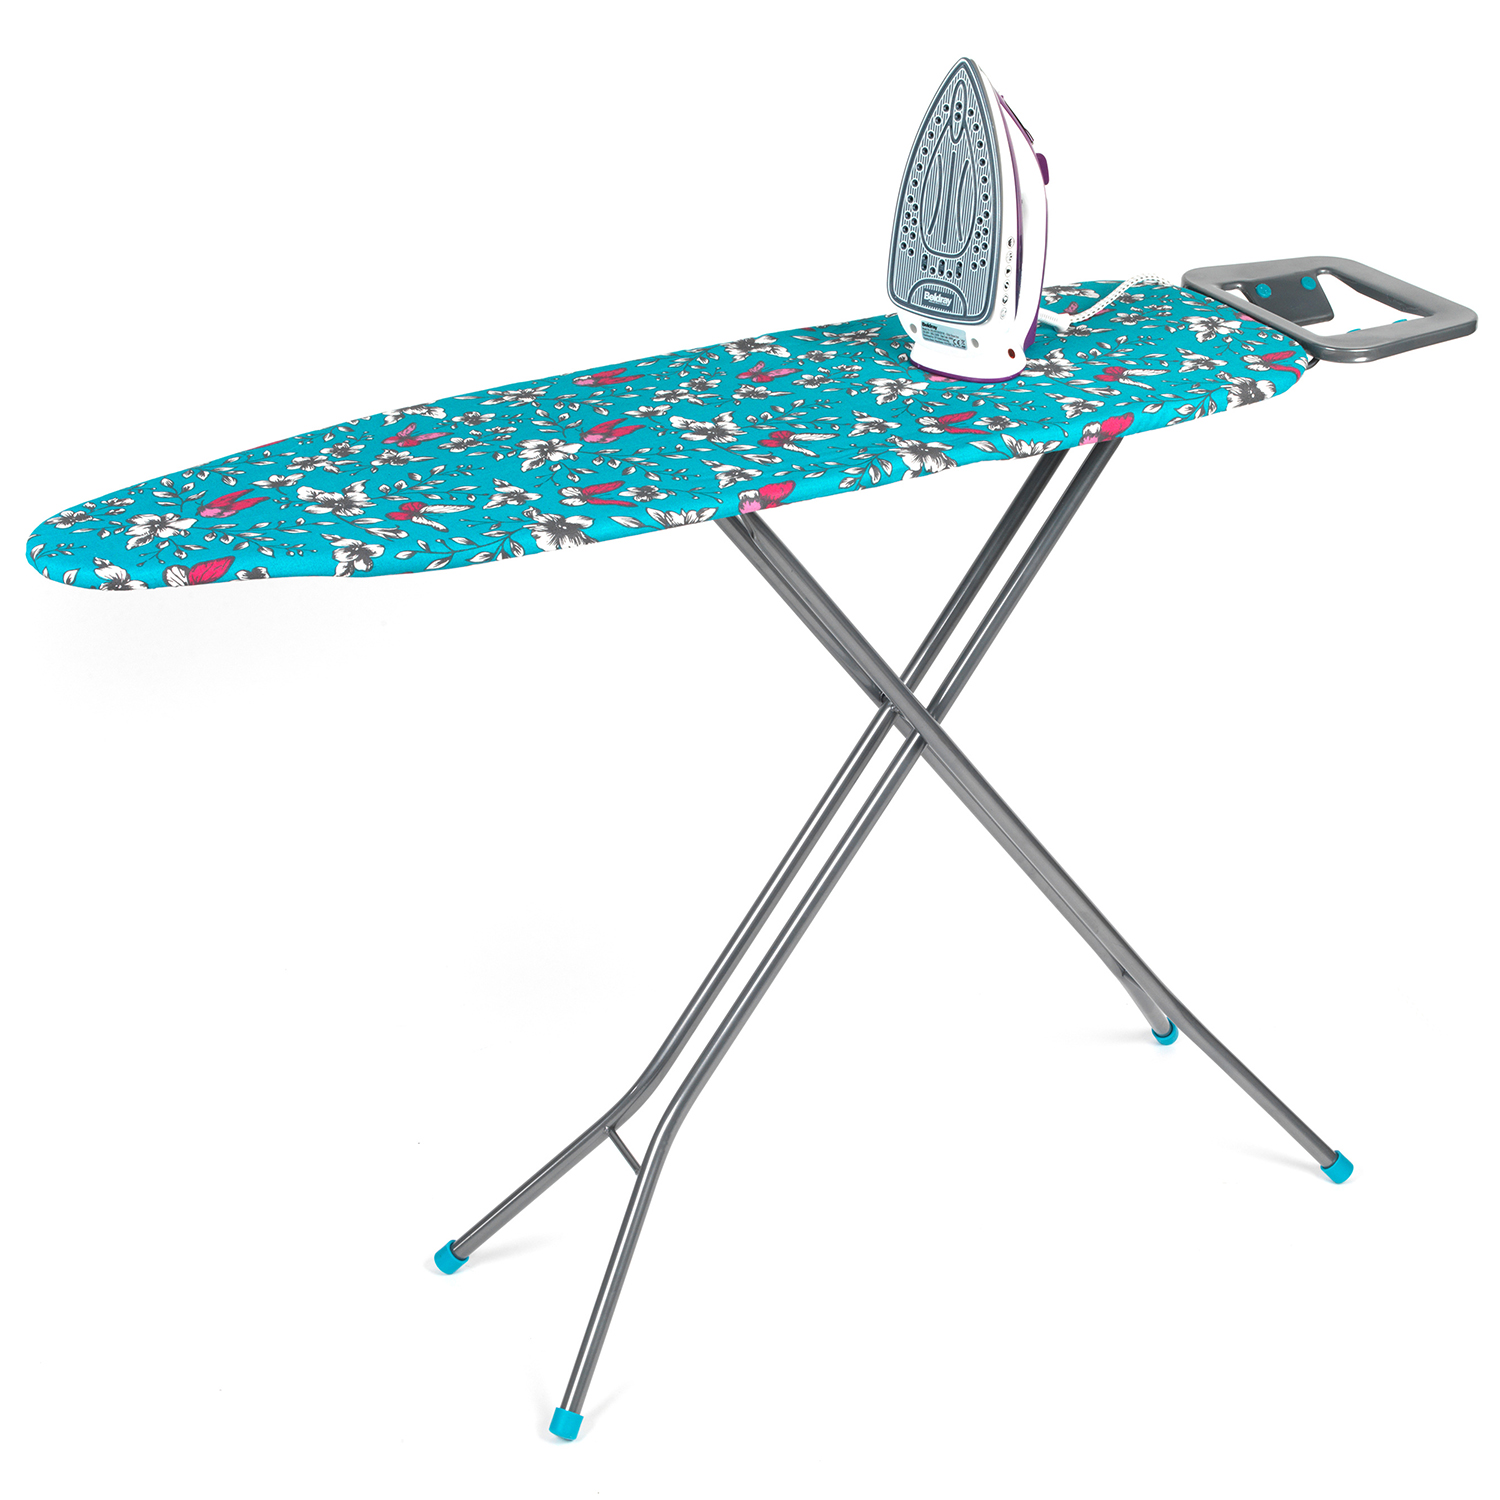 Iron & ironing board - Mr Cool’s Hire Shop